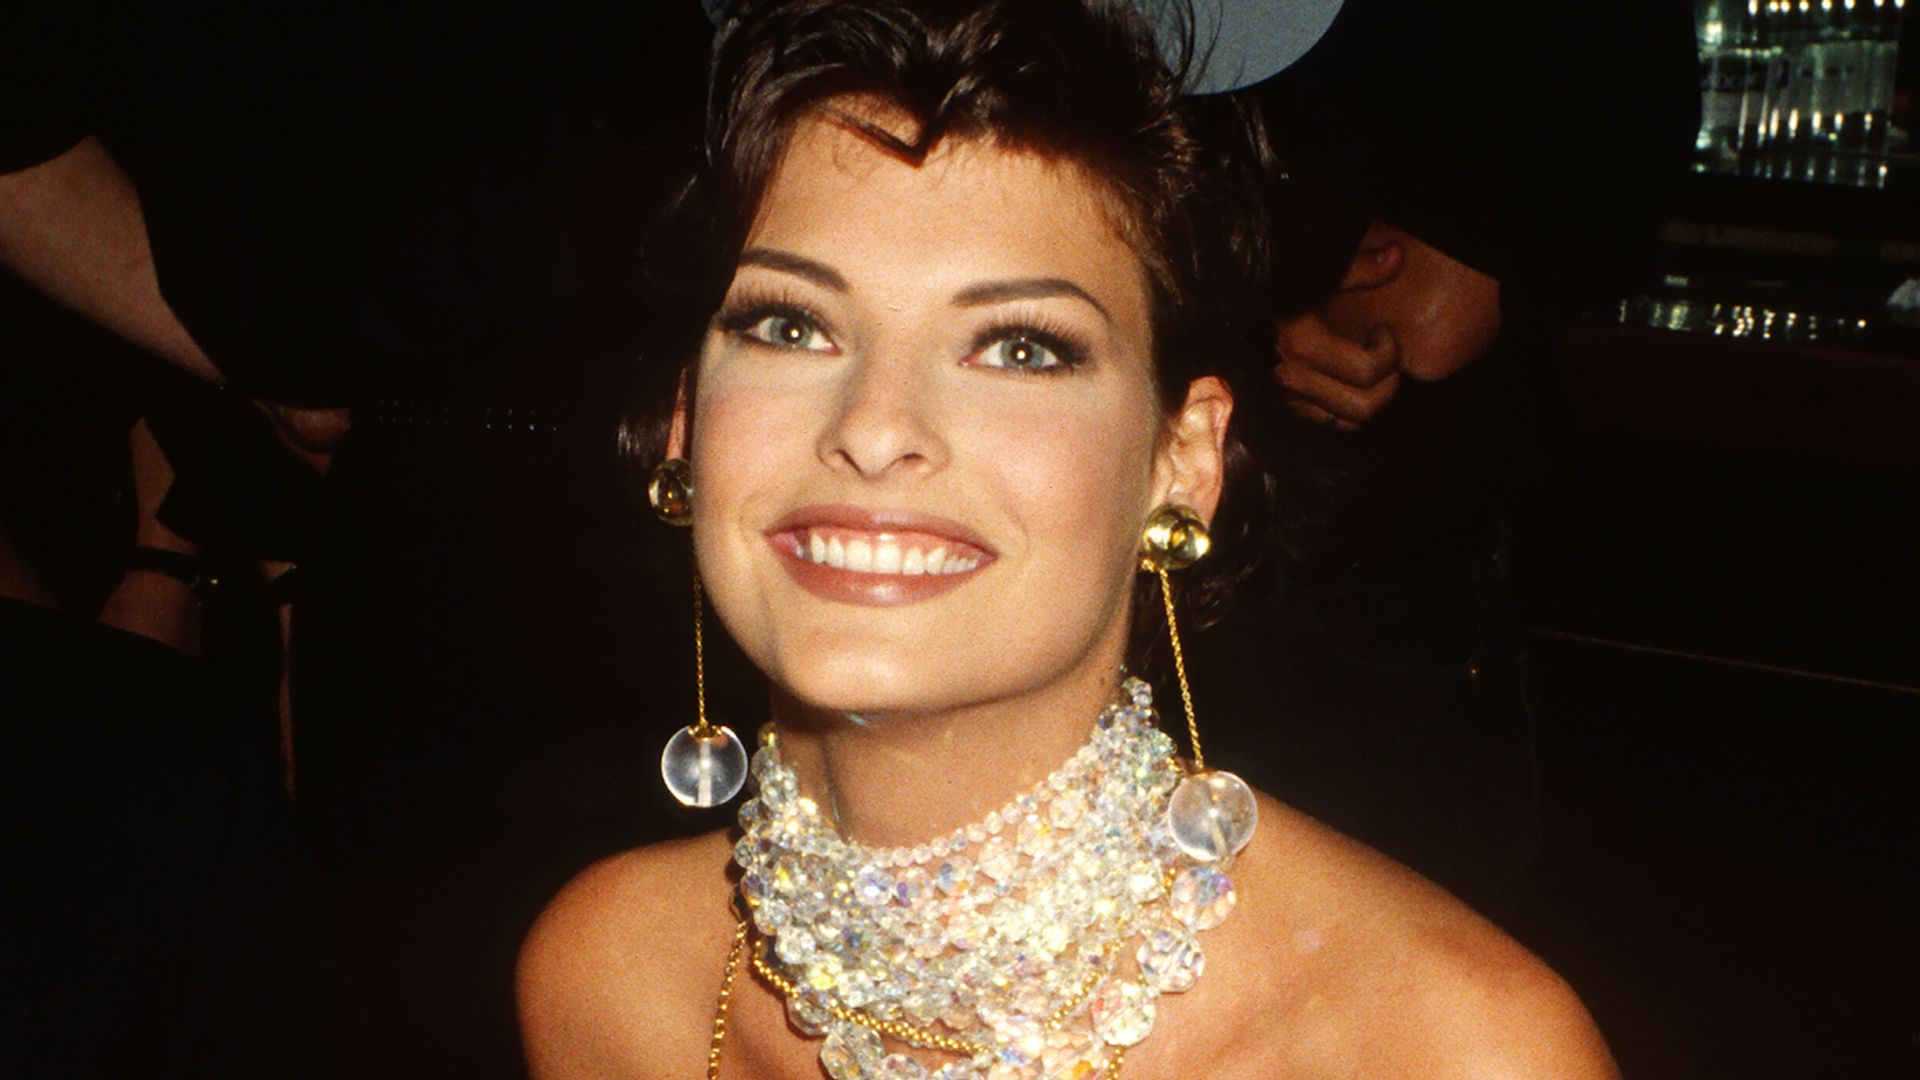 Linda Evangelista smiling at a Paris Fashion Week event in the 90s